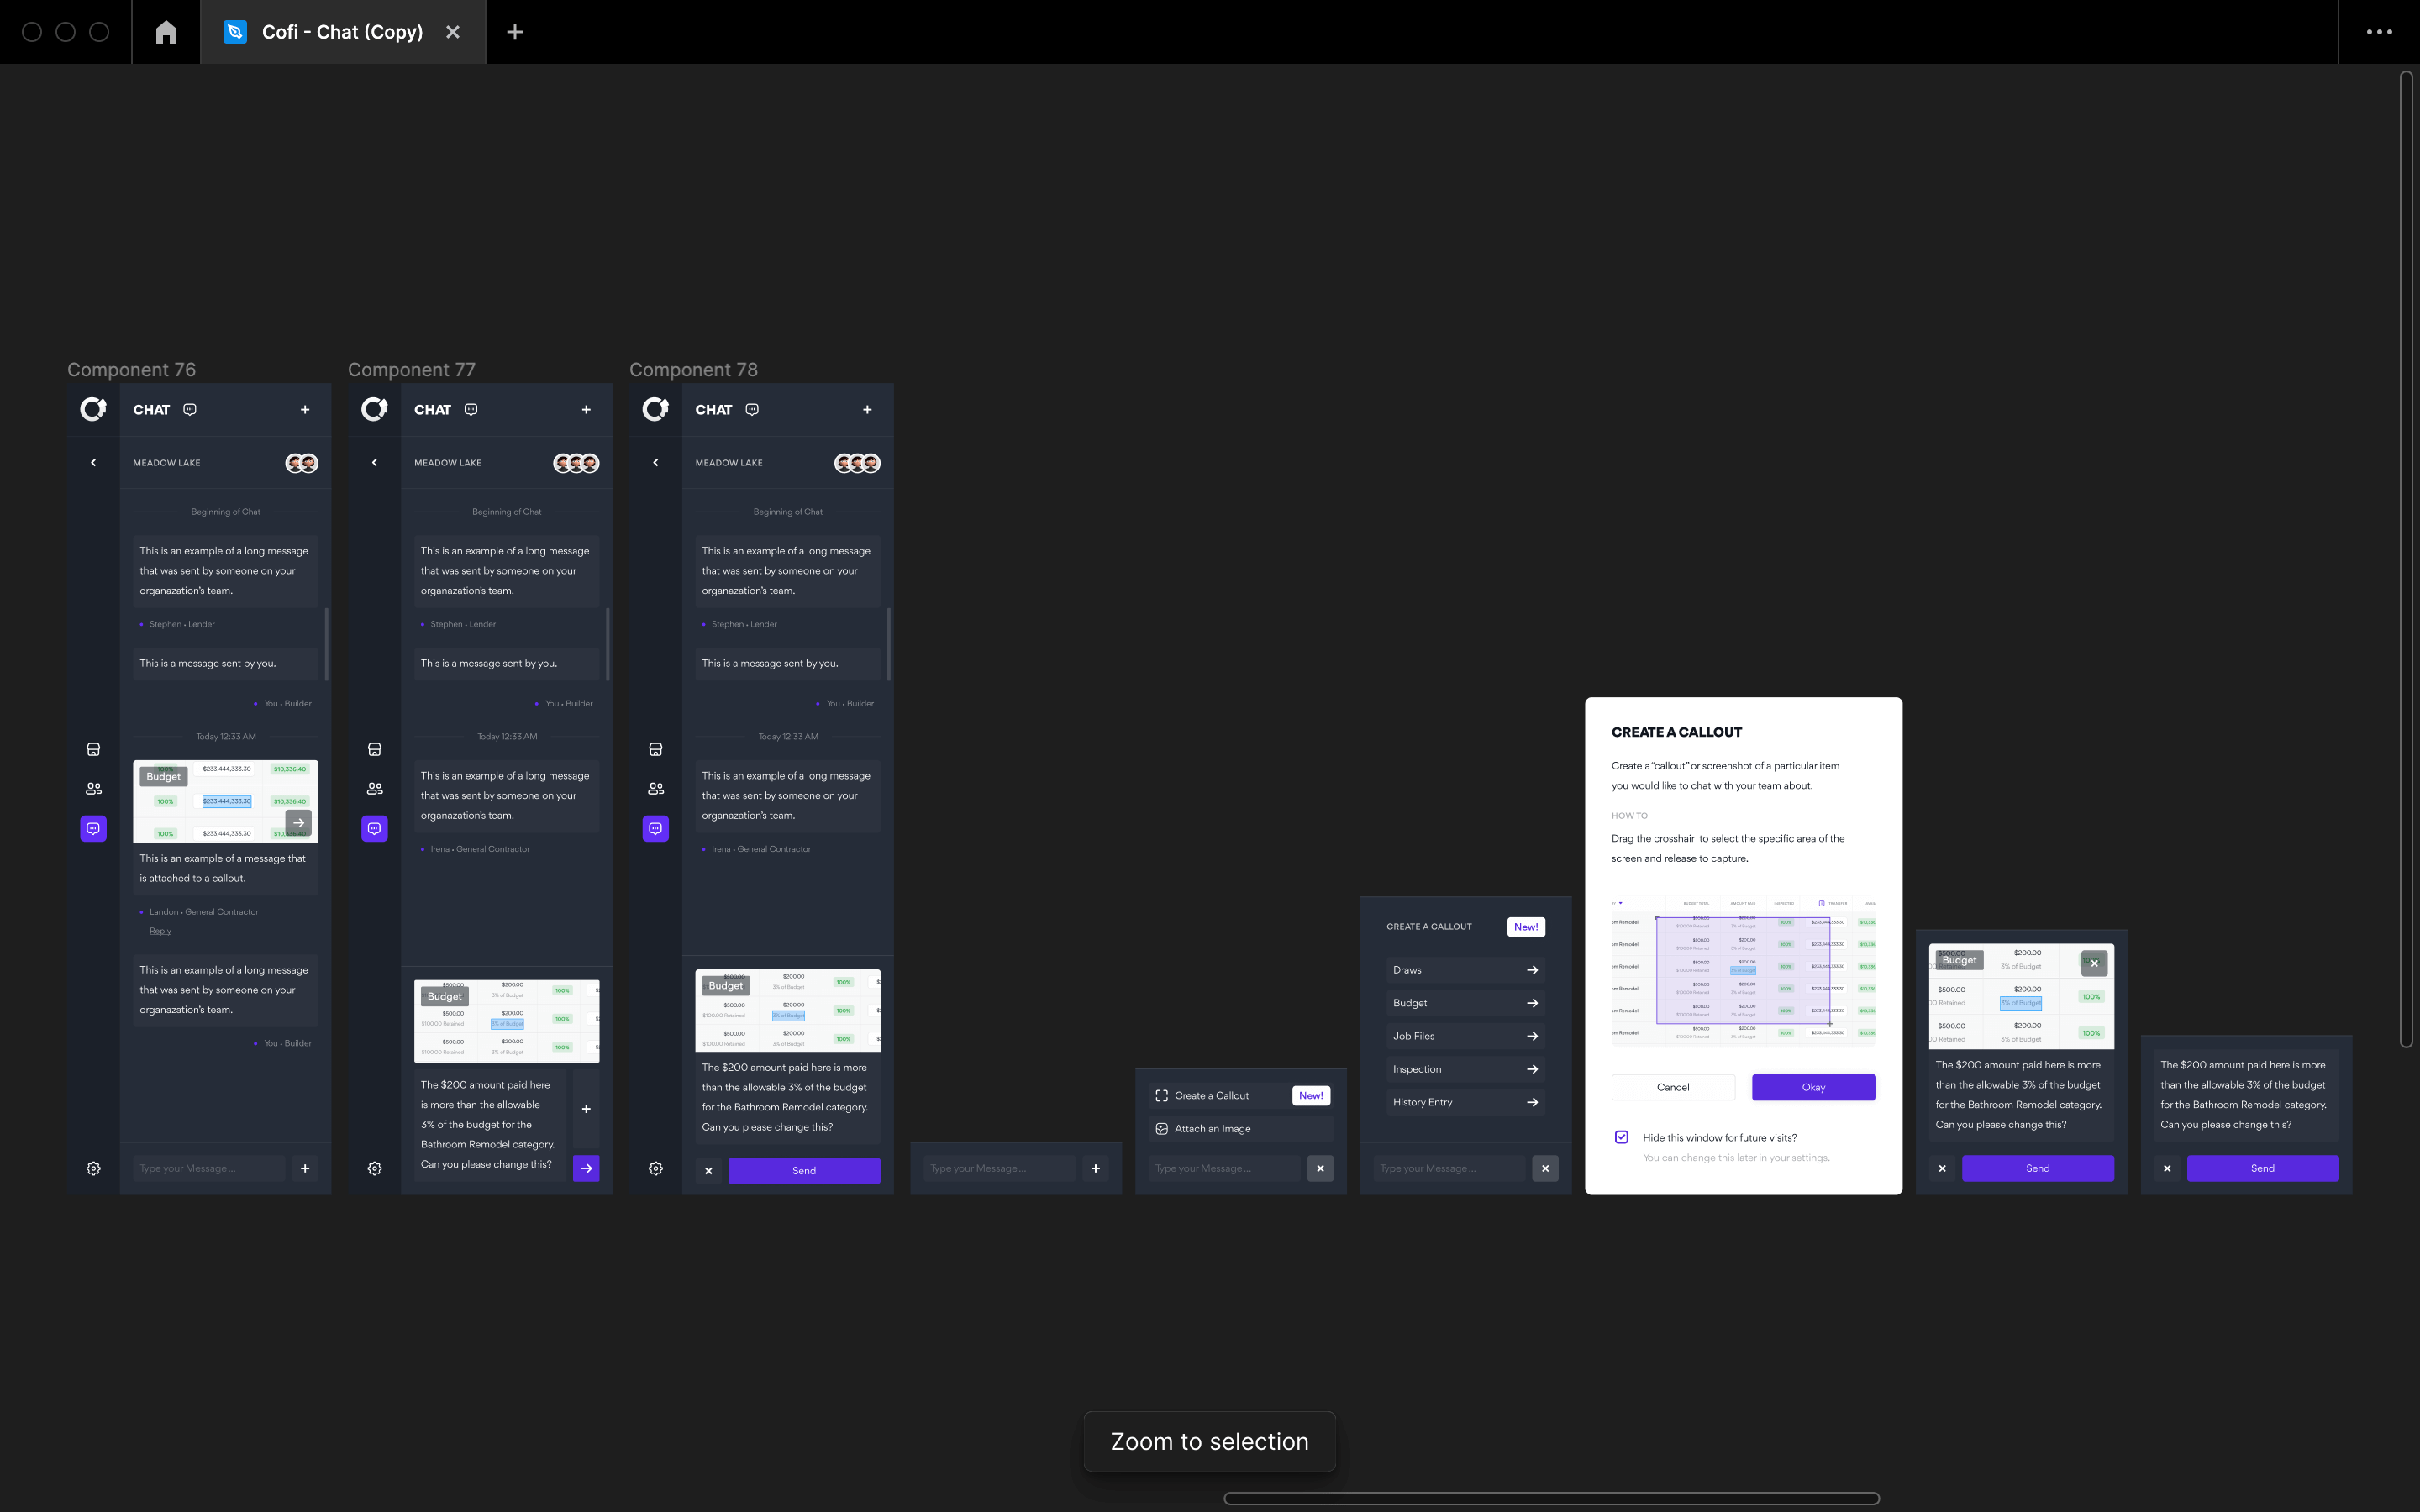 CoFi sidebar navigation for internal chat showing multiple screens for the flow